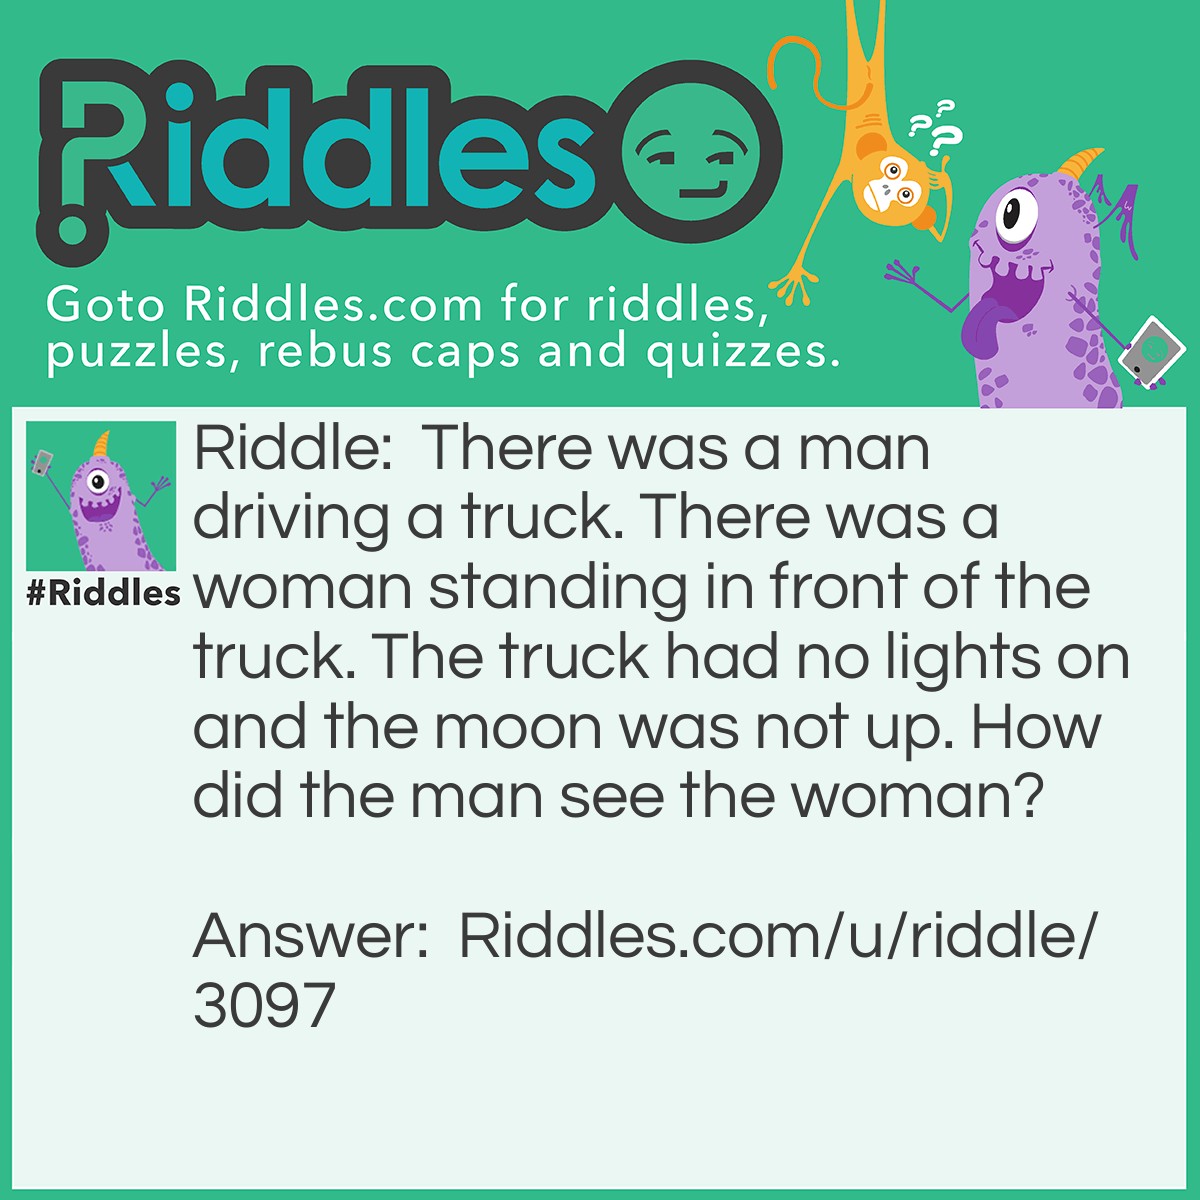 Riddle: There was a man driving a truck. There was a woman standing in front of the truck. The truck had no lights on and the moon was not up. How did the man see the woman? Answer: It was daytime.